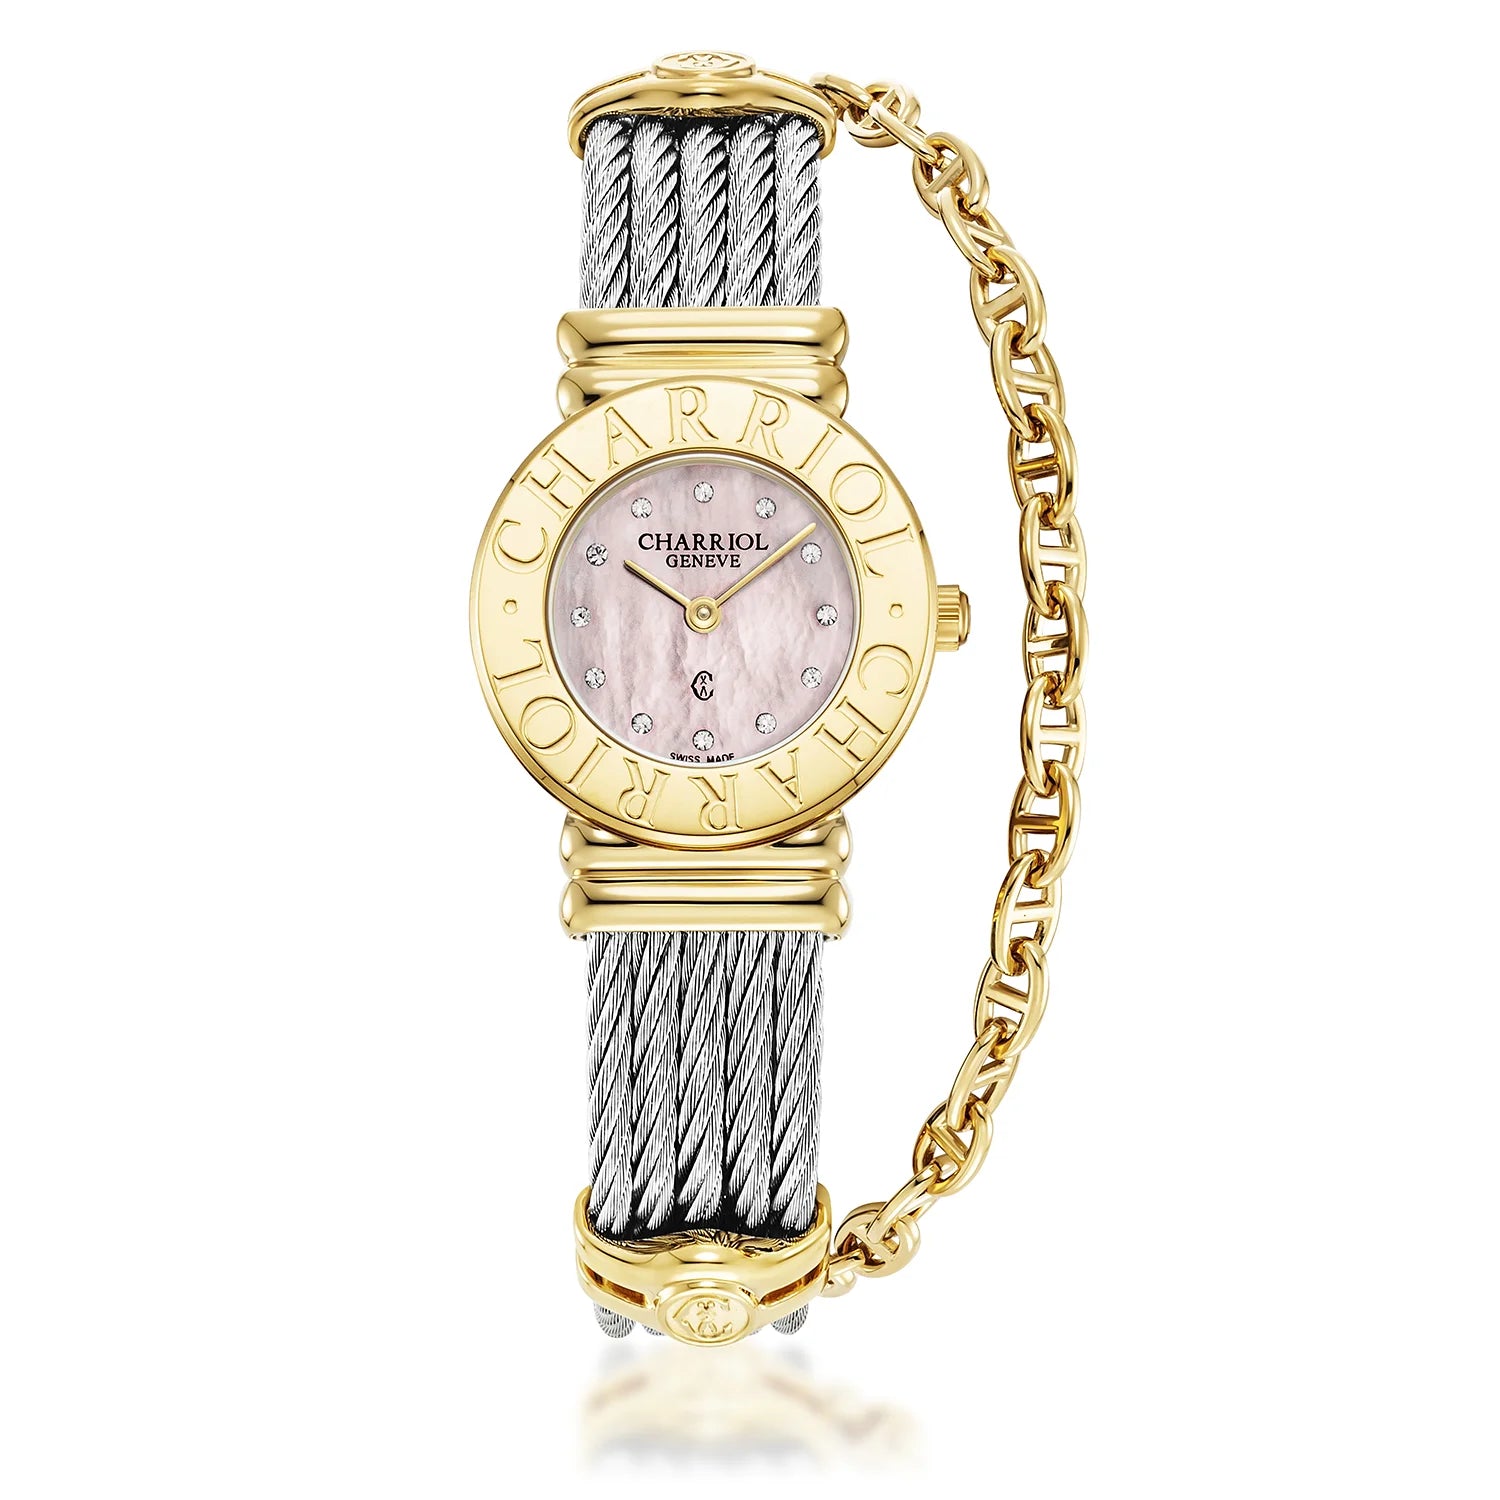 St Tropez Icon 24.5mm Watch Yellow Gold PVD, Steel Cable, Charriol Bezel and 12 Diamonds Pink MOP Dial - Charriol Geneve -  Watch